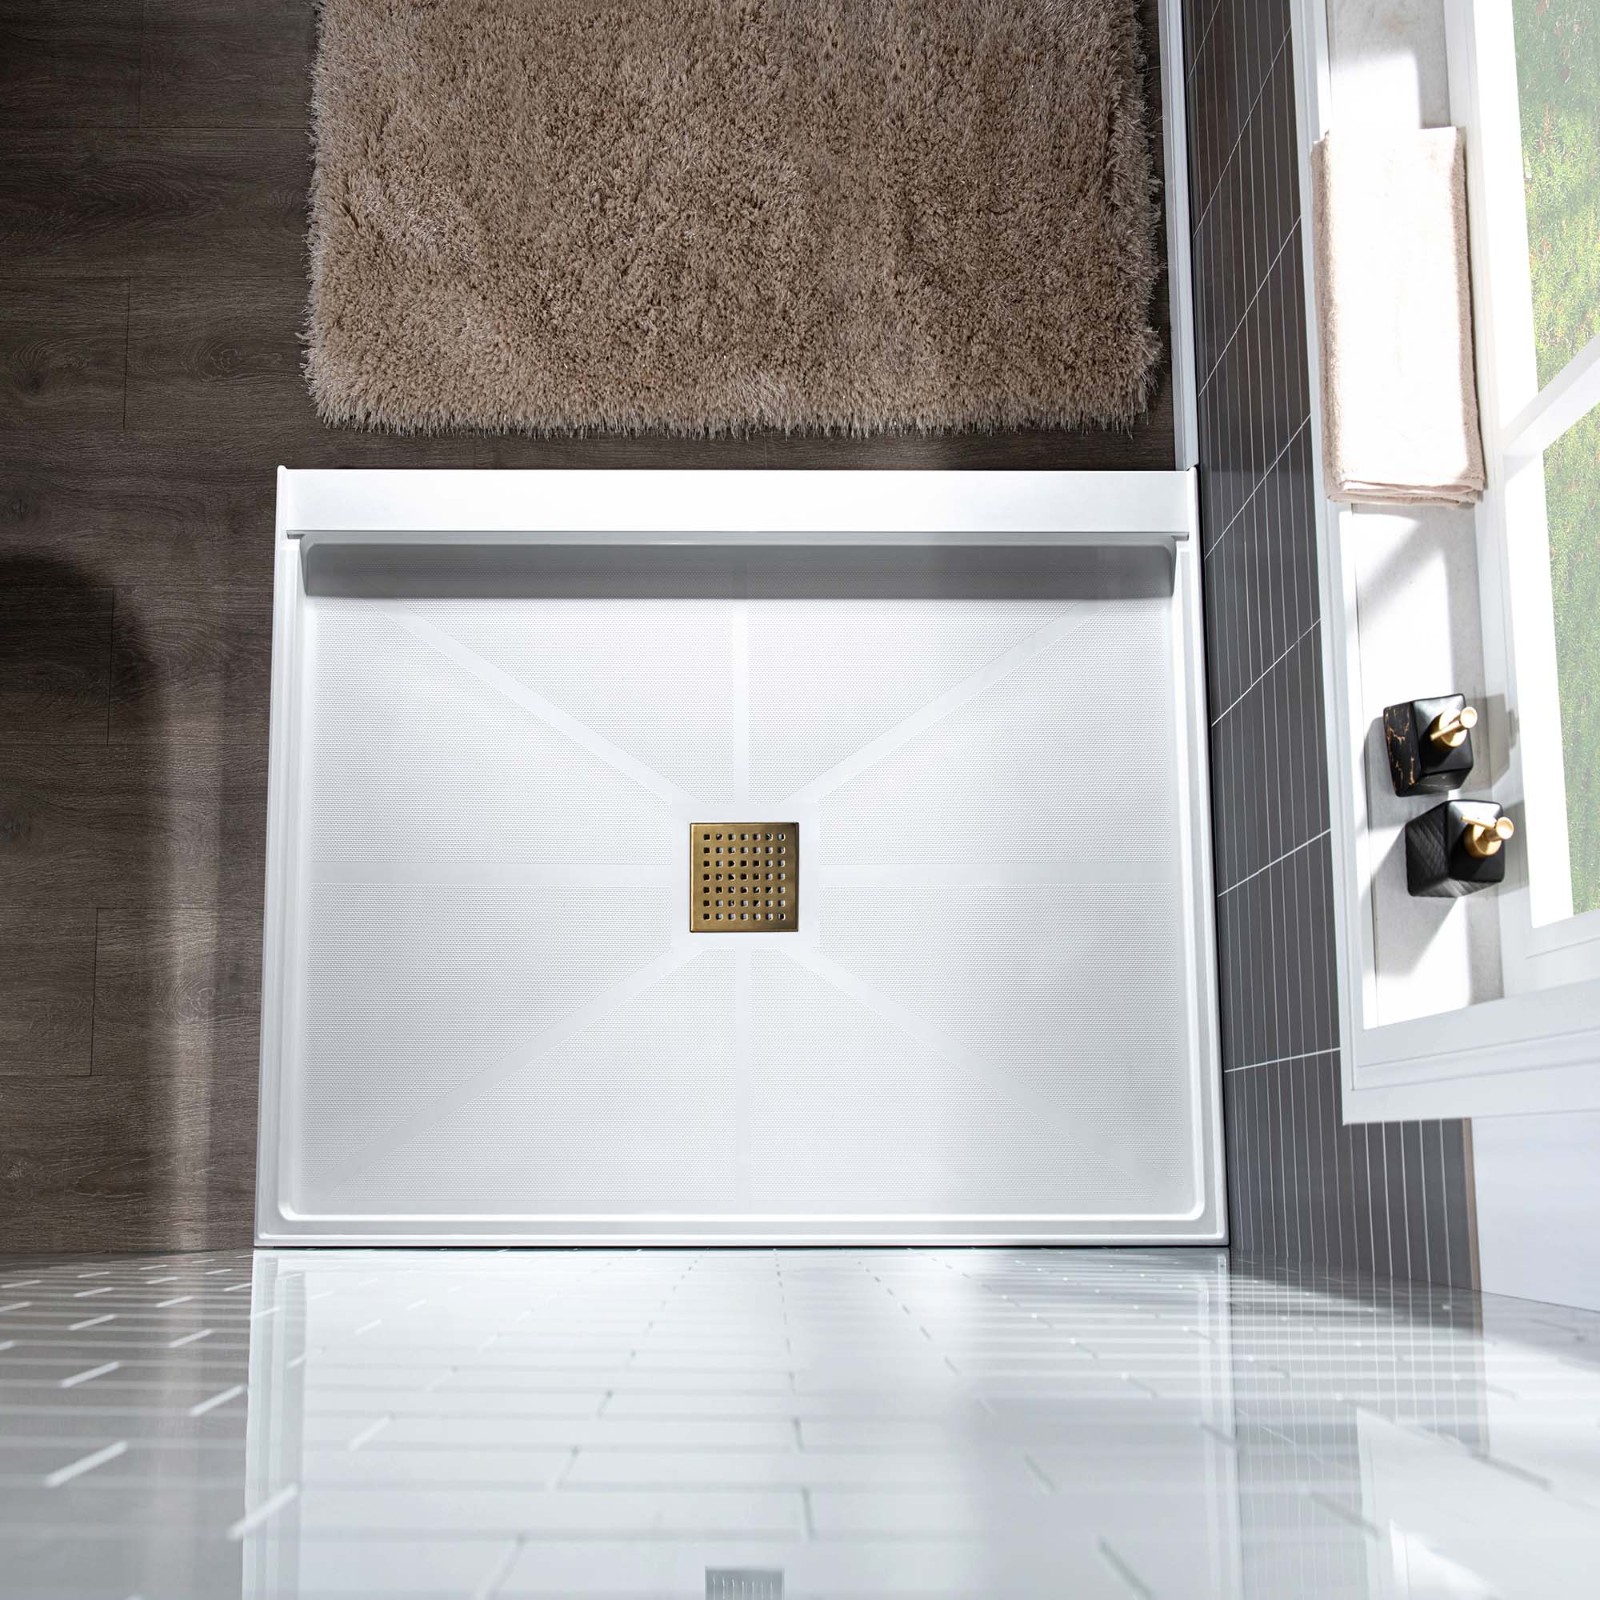  WOODBRIDGE SBR3636-1000C-BG SolidSurface Shower Base with Recessed Trench Side Including Brushed Gold Linear Cover, 36